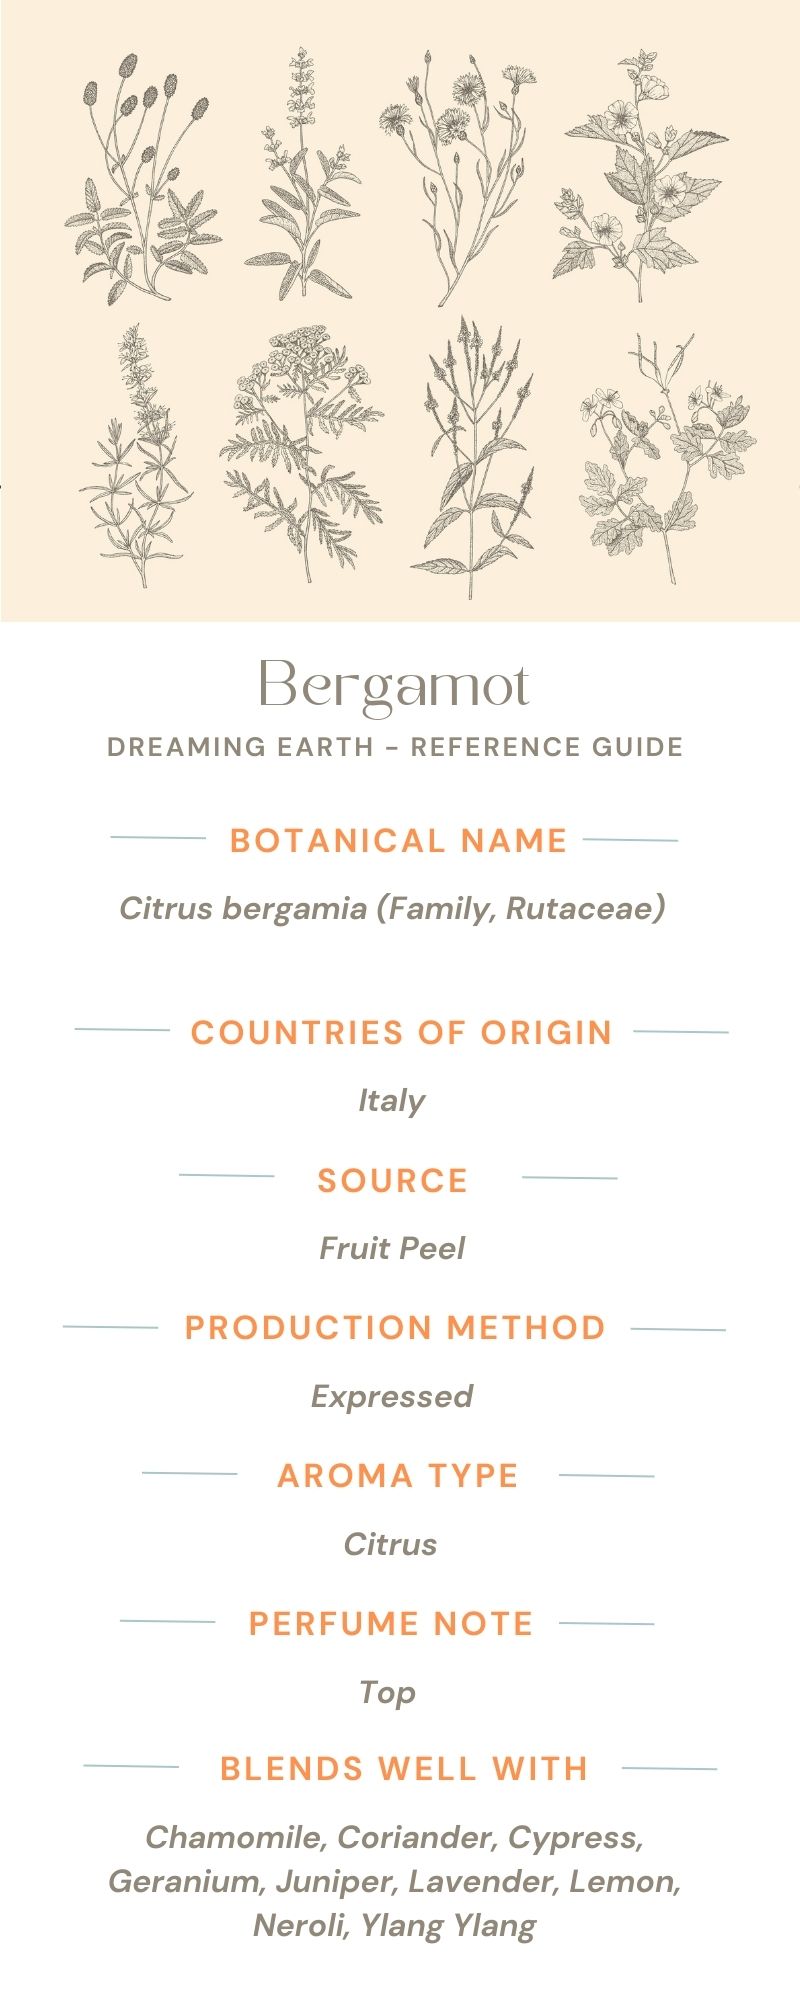 Load image into Gallery viewer, Bergamot Organic Essential Oil - Dreaming Earth Inc
